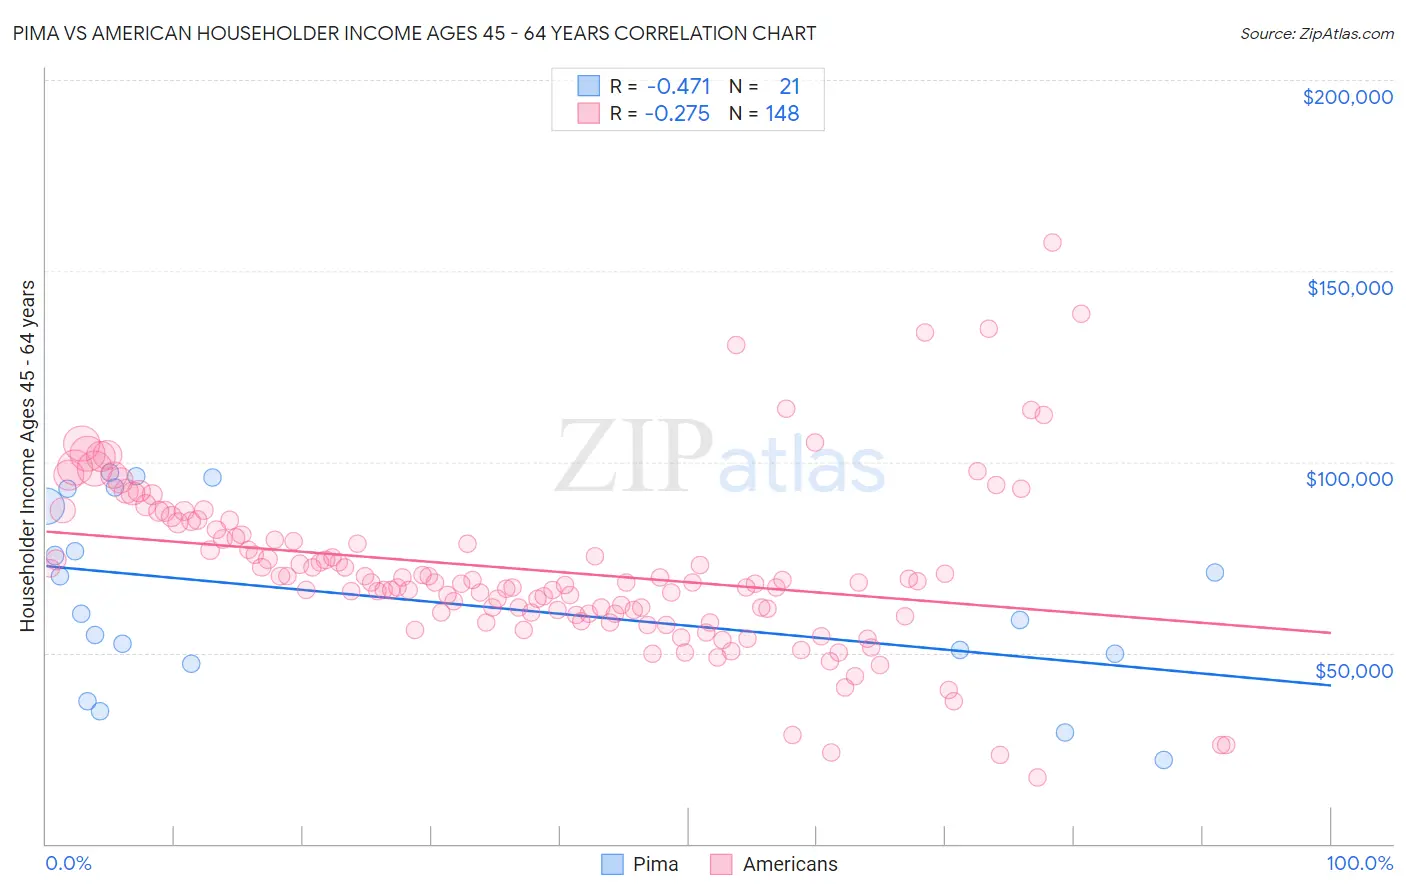 Pima vs American Householder Income Ages 45 - 64 years